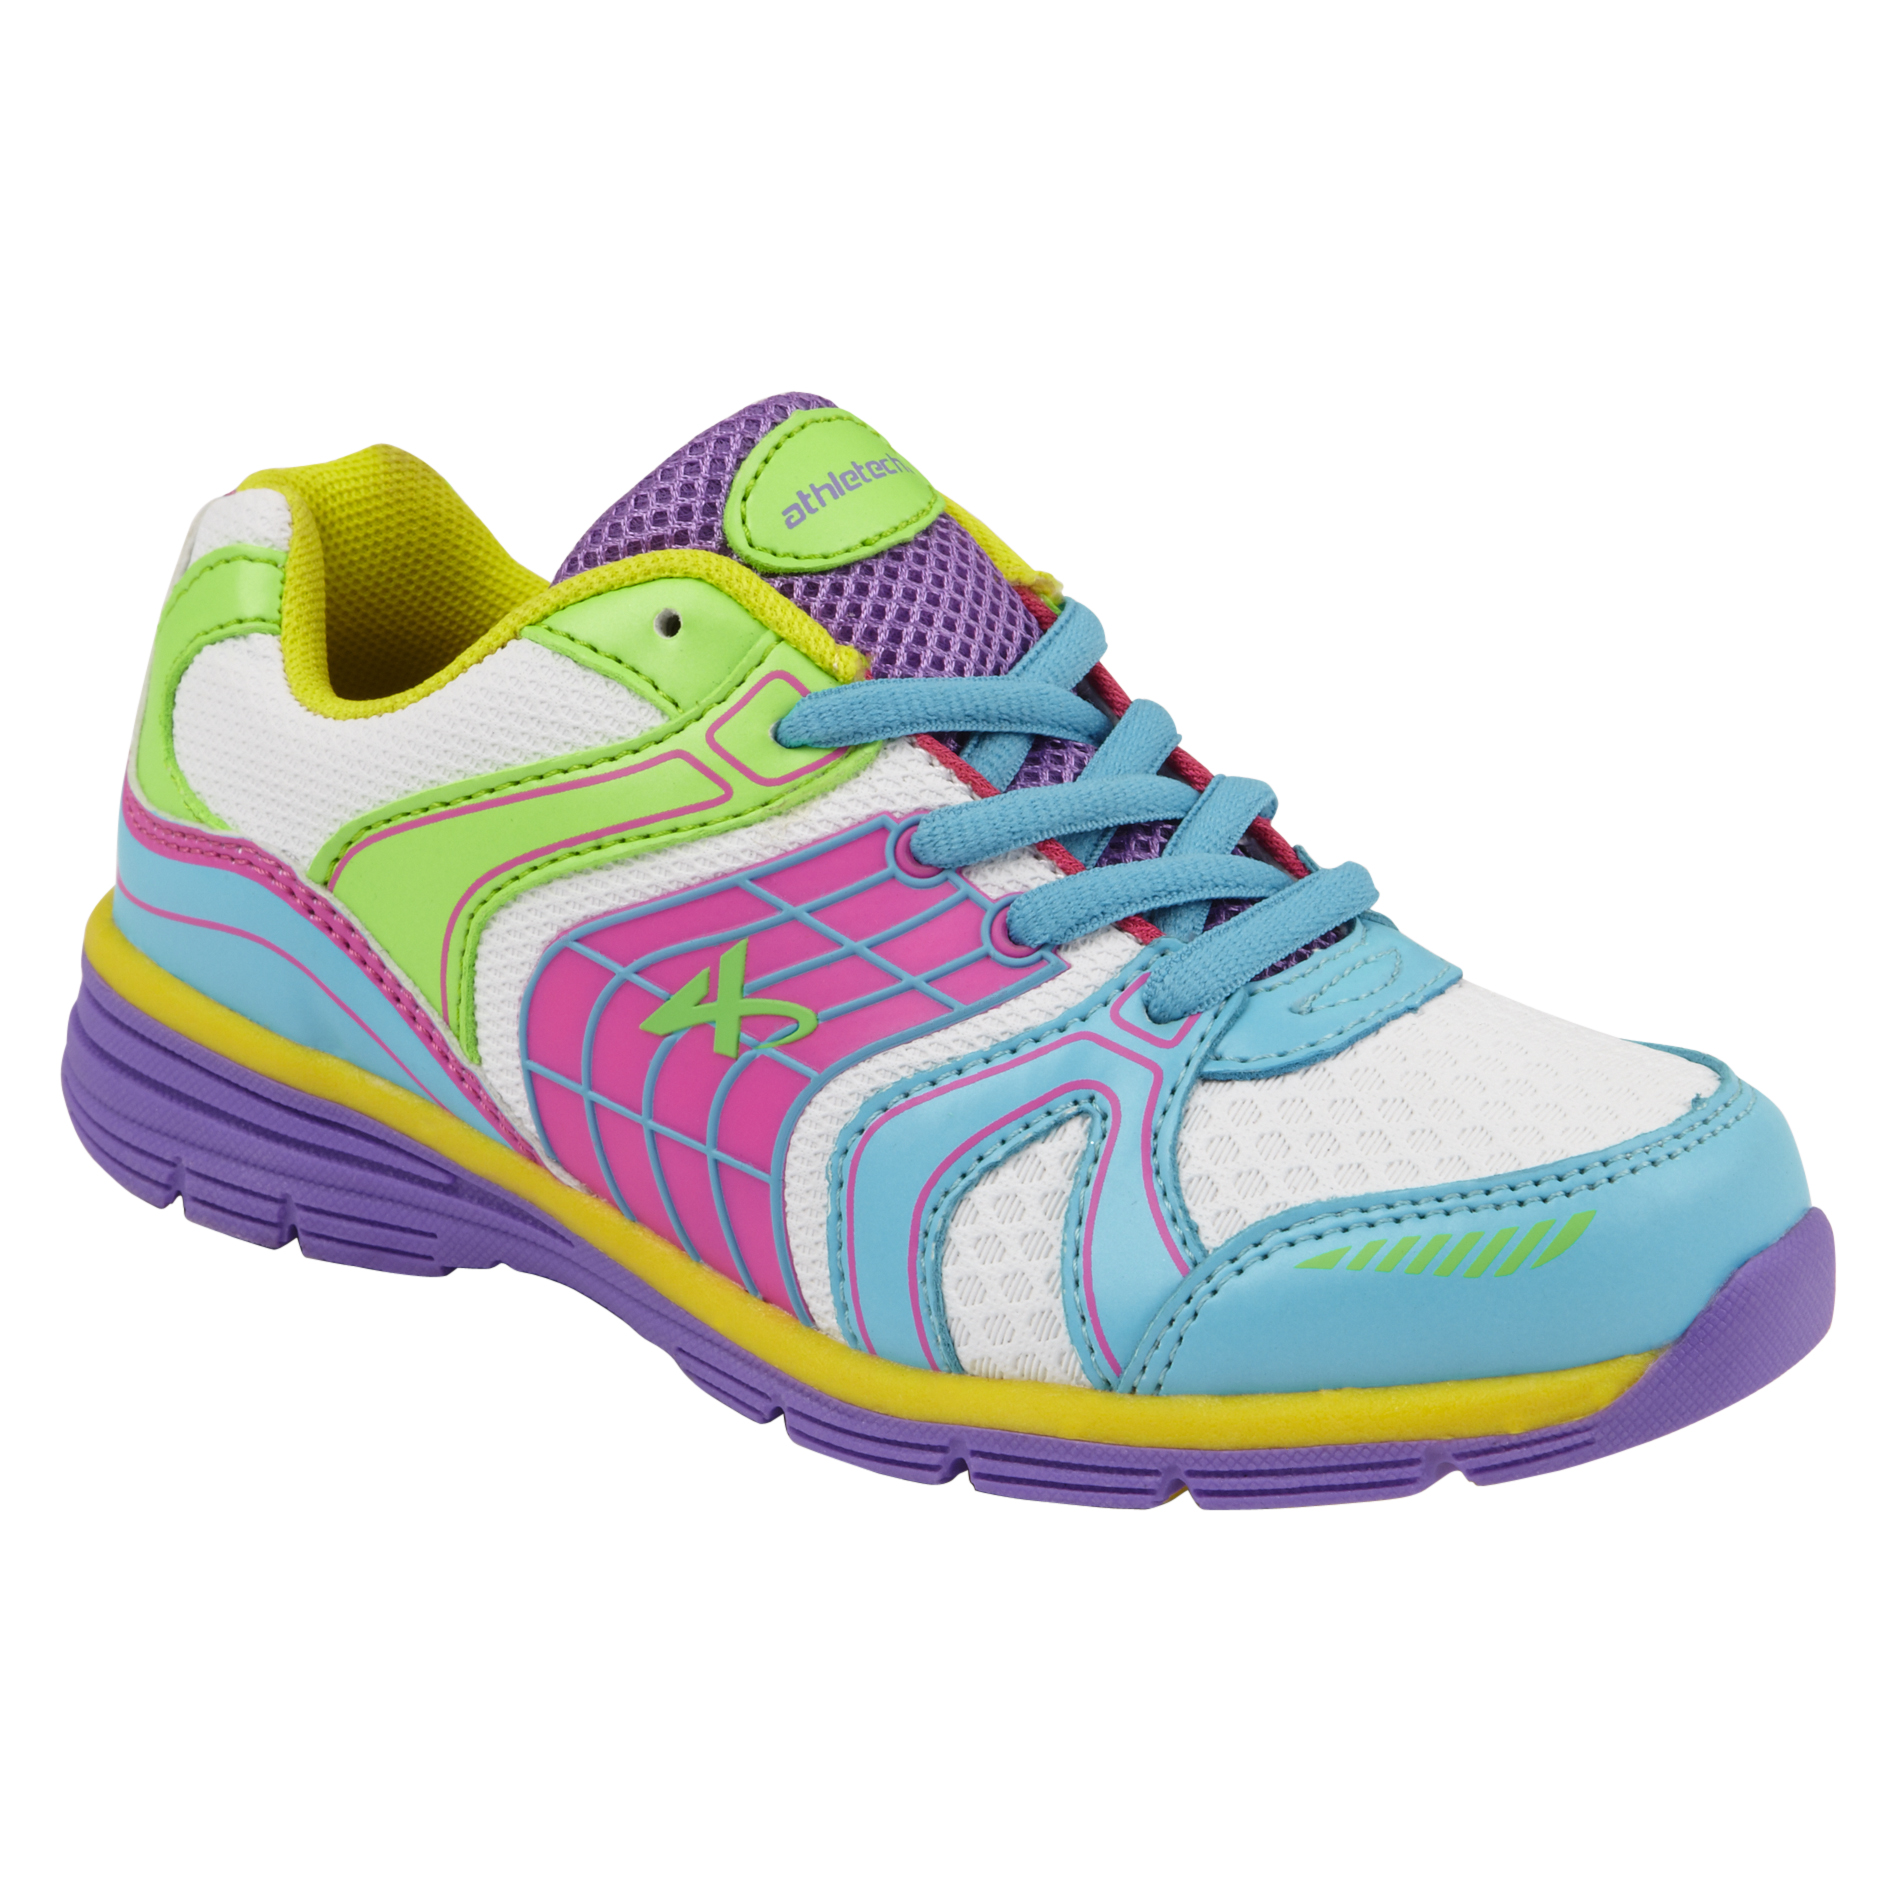 Athletech Girl's Sneaker L-Willow 2 - White/Multi - Everyday Great Price